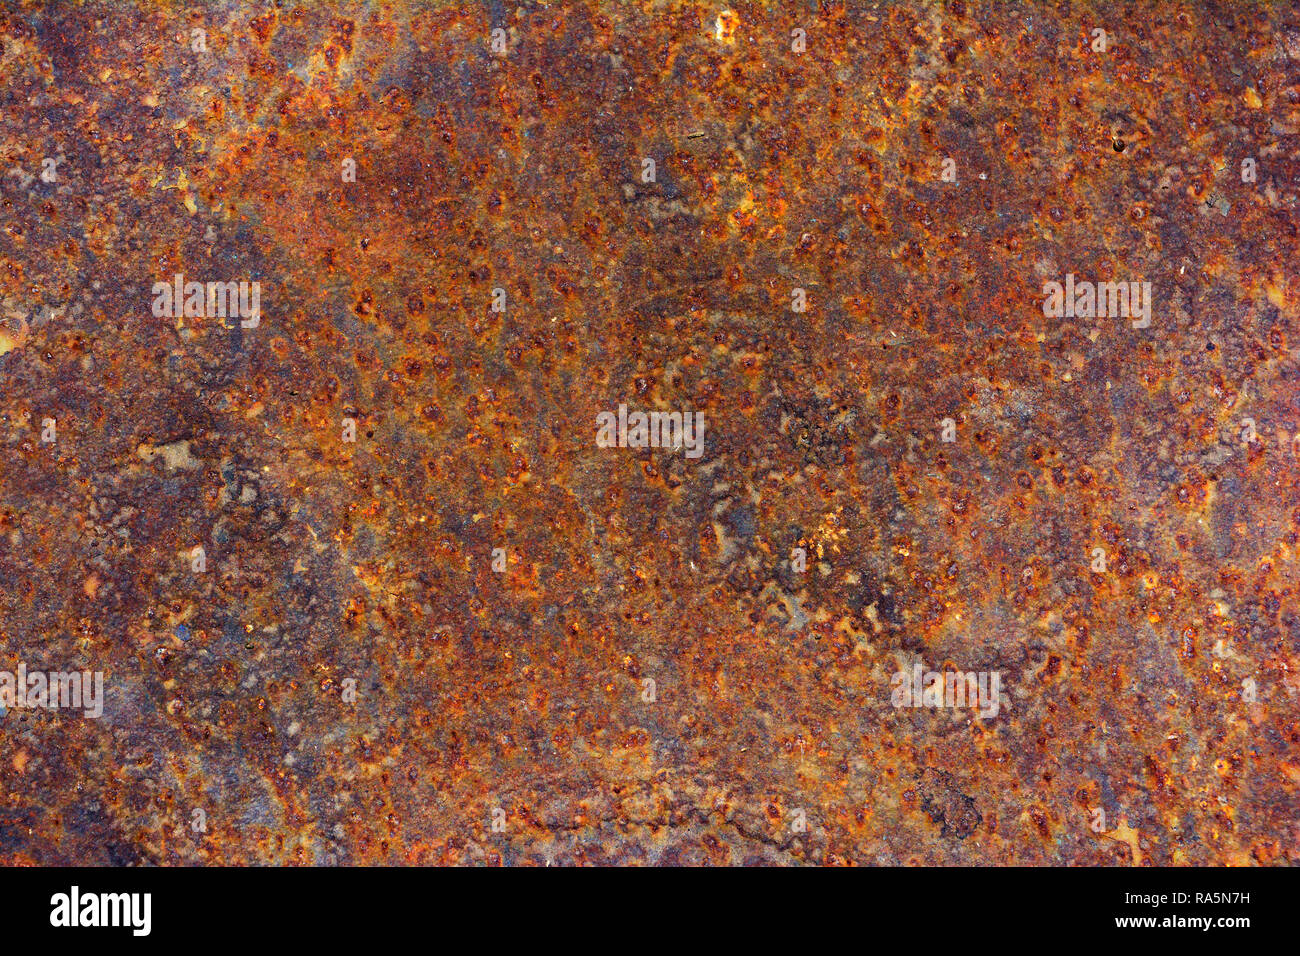 The vintage rusty grunge steel textured background Stock Photo